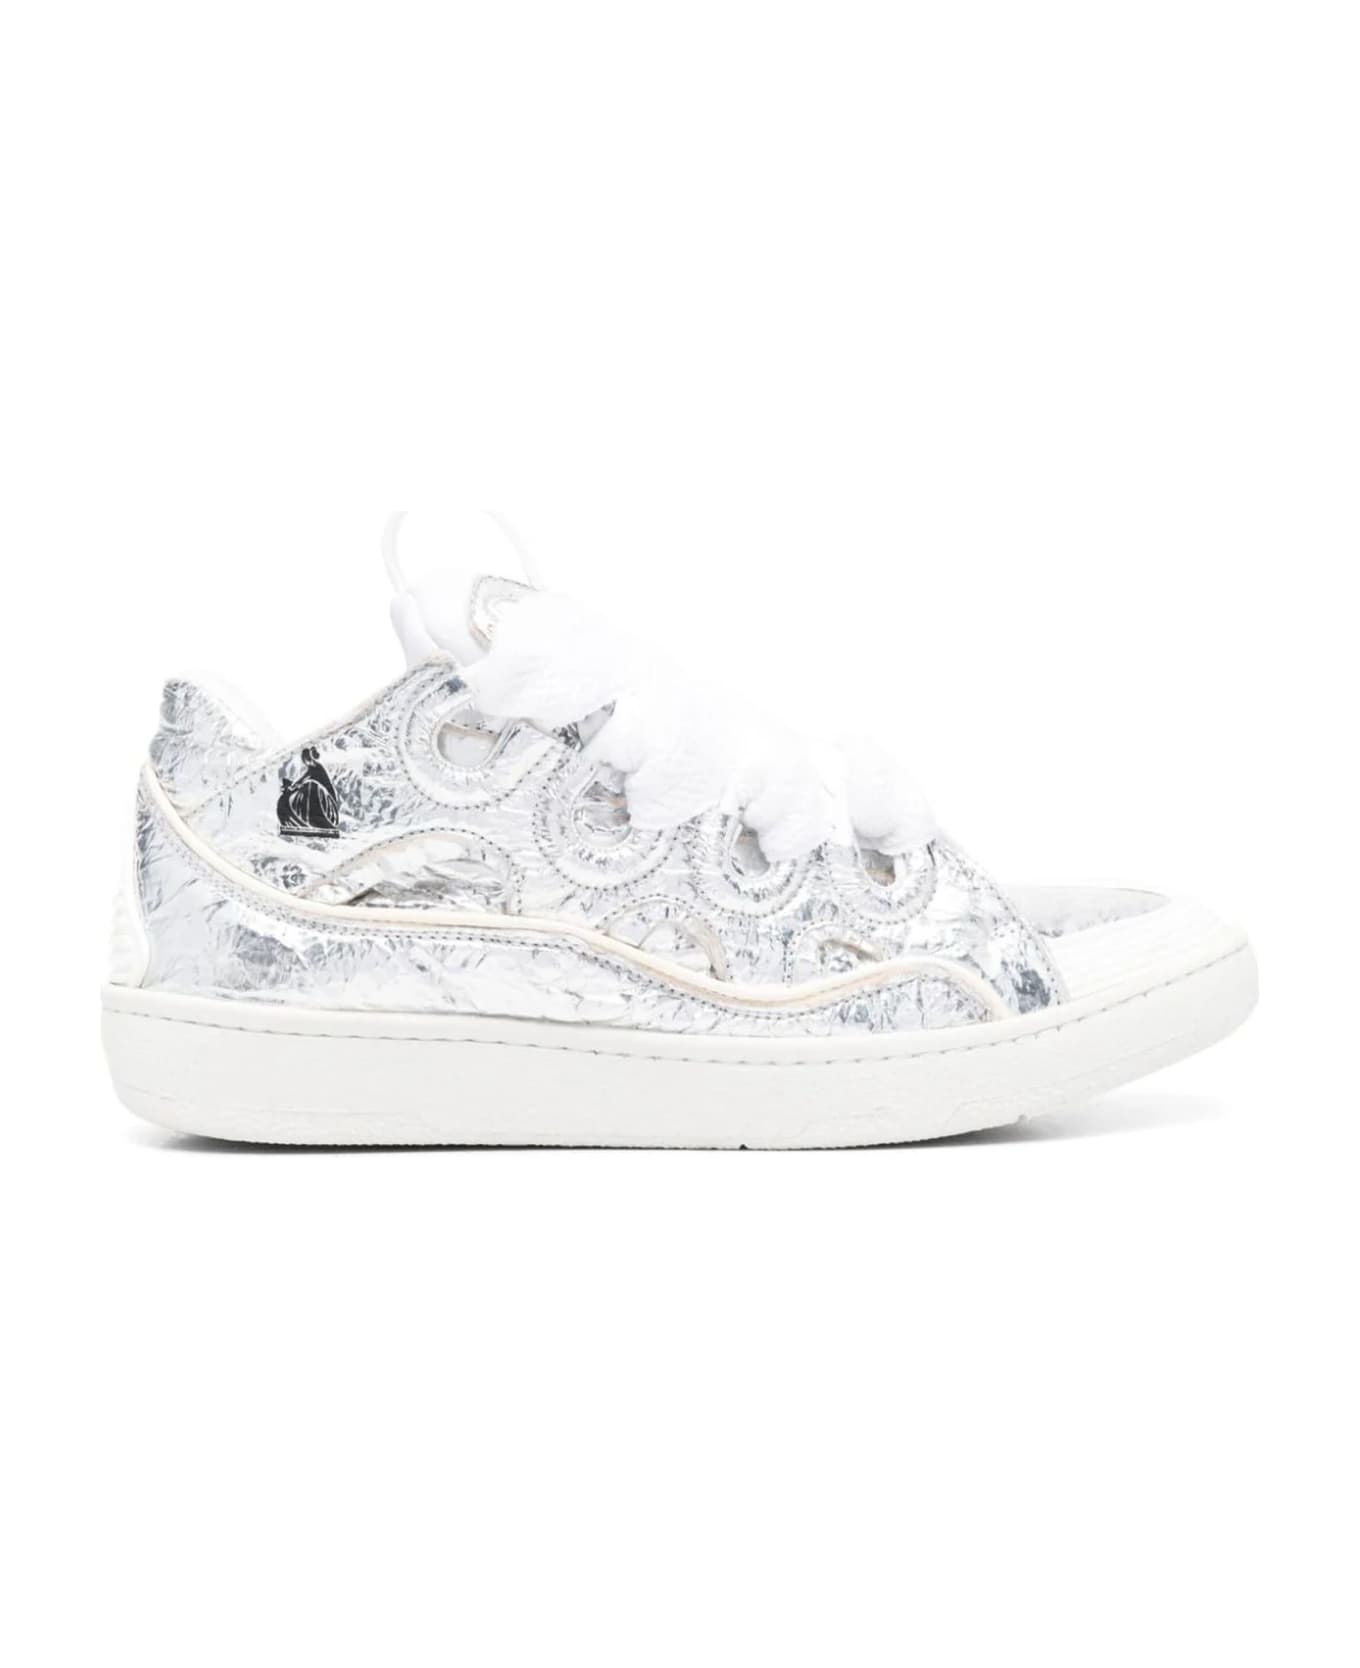 Lanvin Curb Sneakers In Crinkled Metallic Leather - Silver